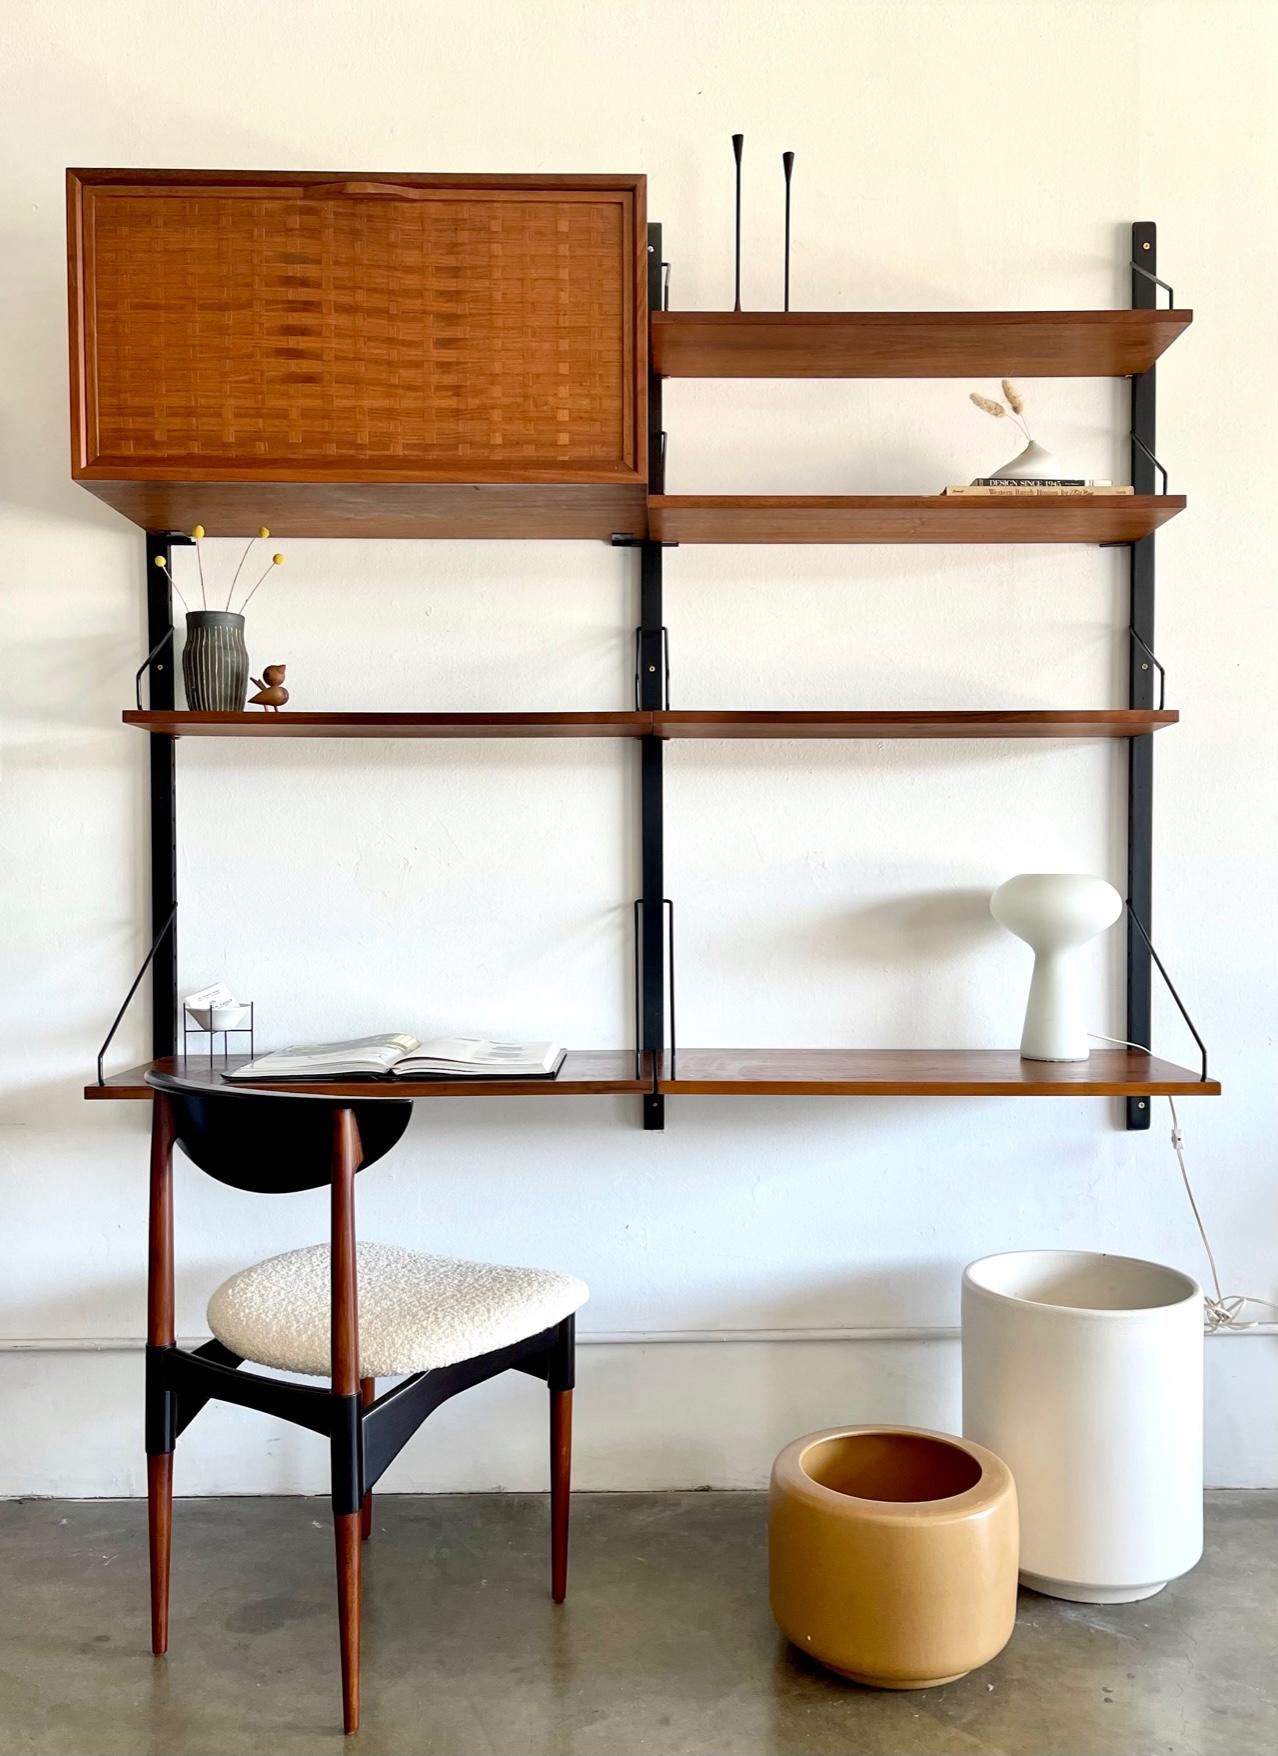 Poul Cadovius Royal system wall unit in teak, ca. 1965. Unit is in very good original condition with original wall mounts that have been painted black for a nice contrast. Teak basketweave box can hold media, papers or glassware. Two of the lower